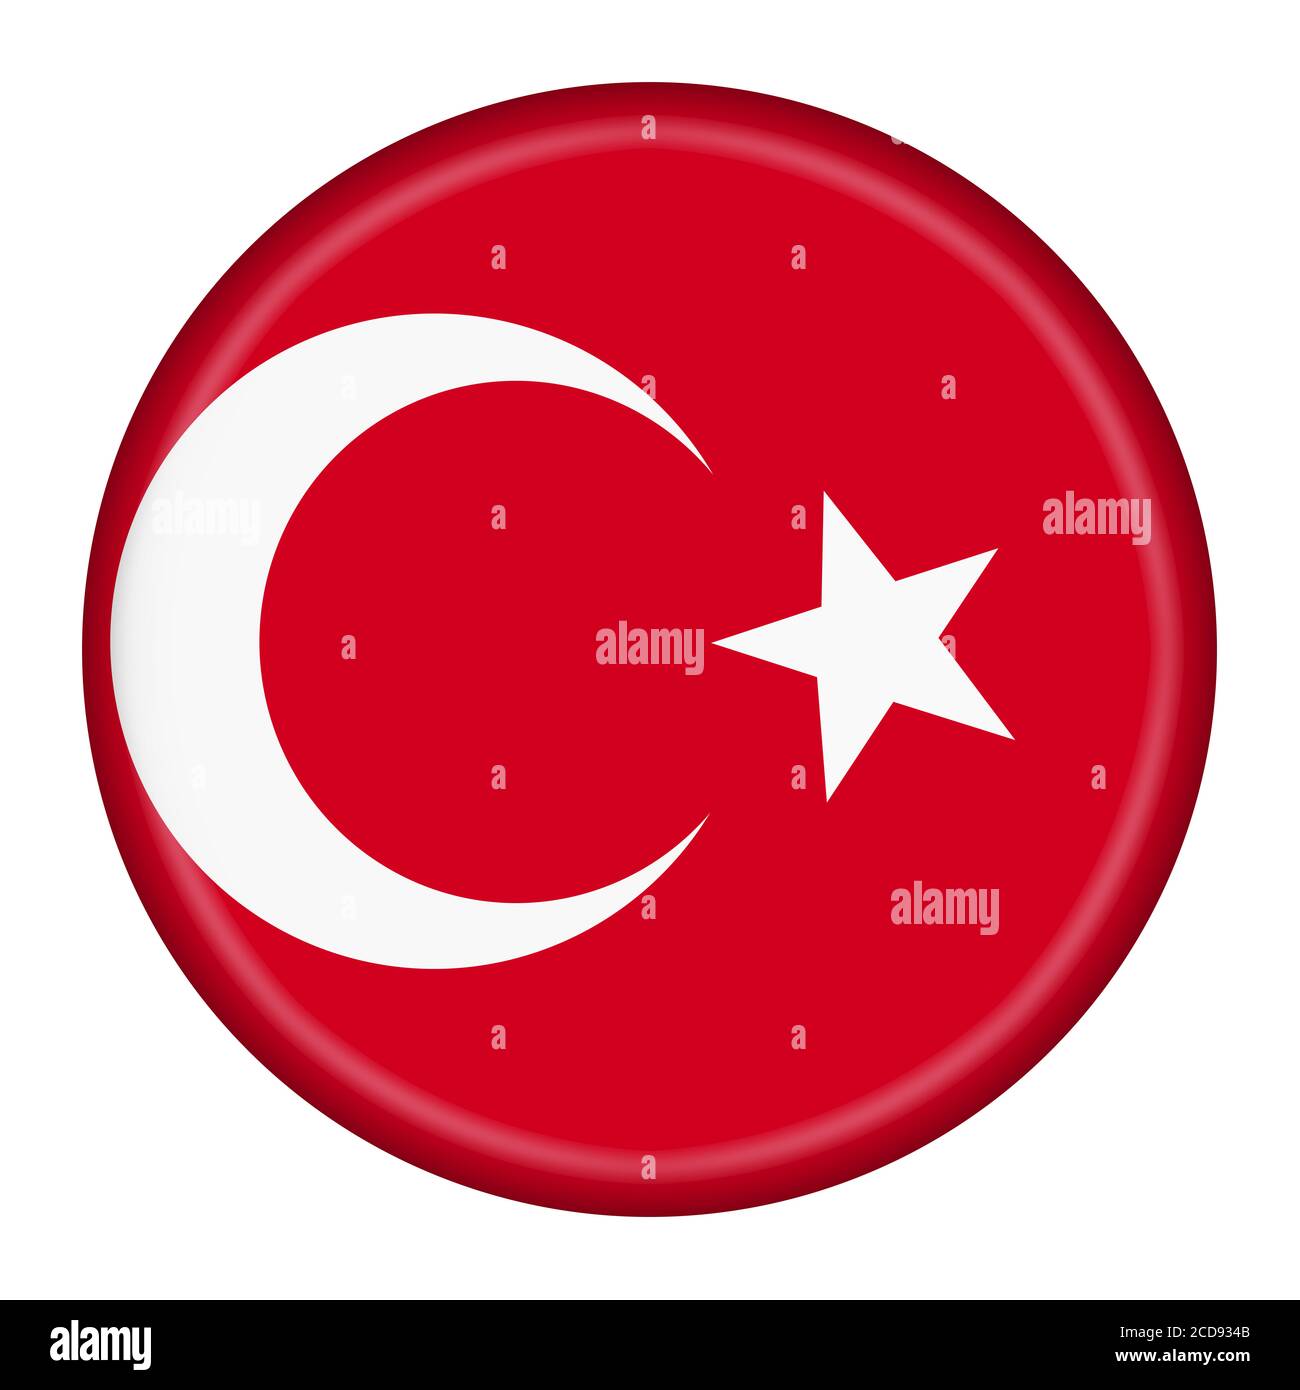 Turkey flag button 3d illustration with clipping path crescent moon star Stock Photo